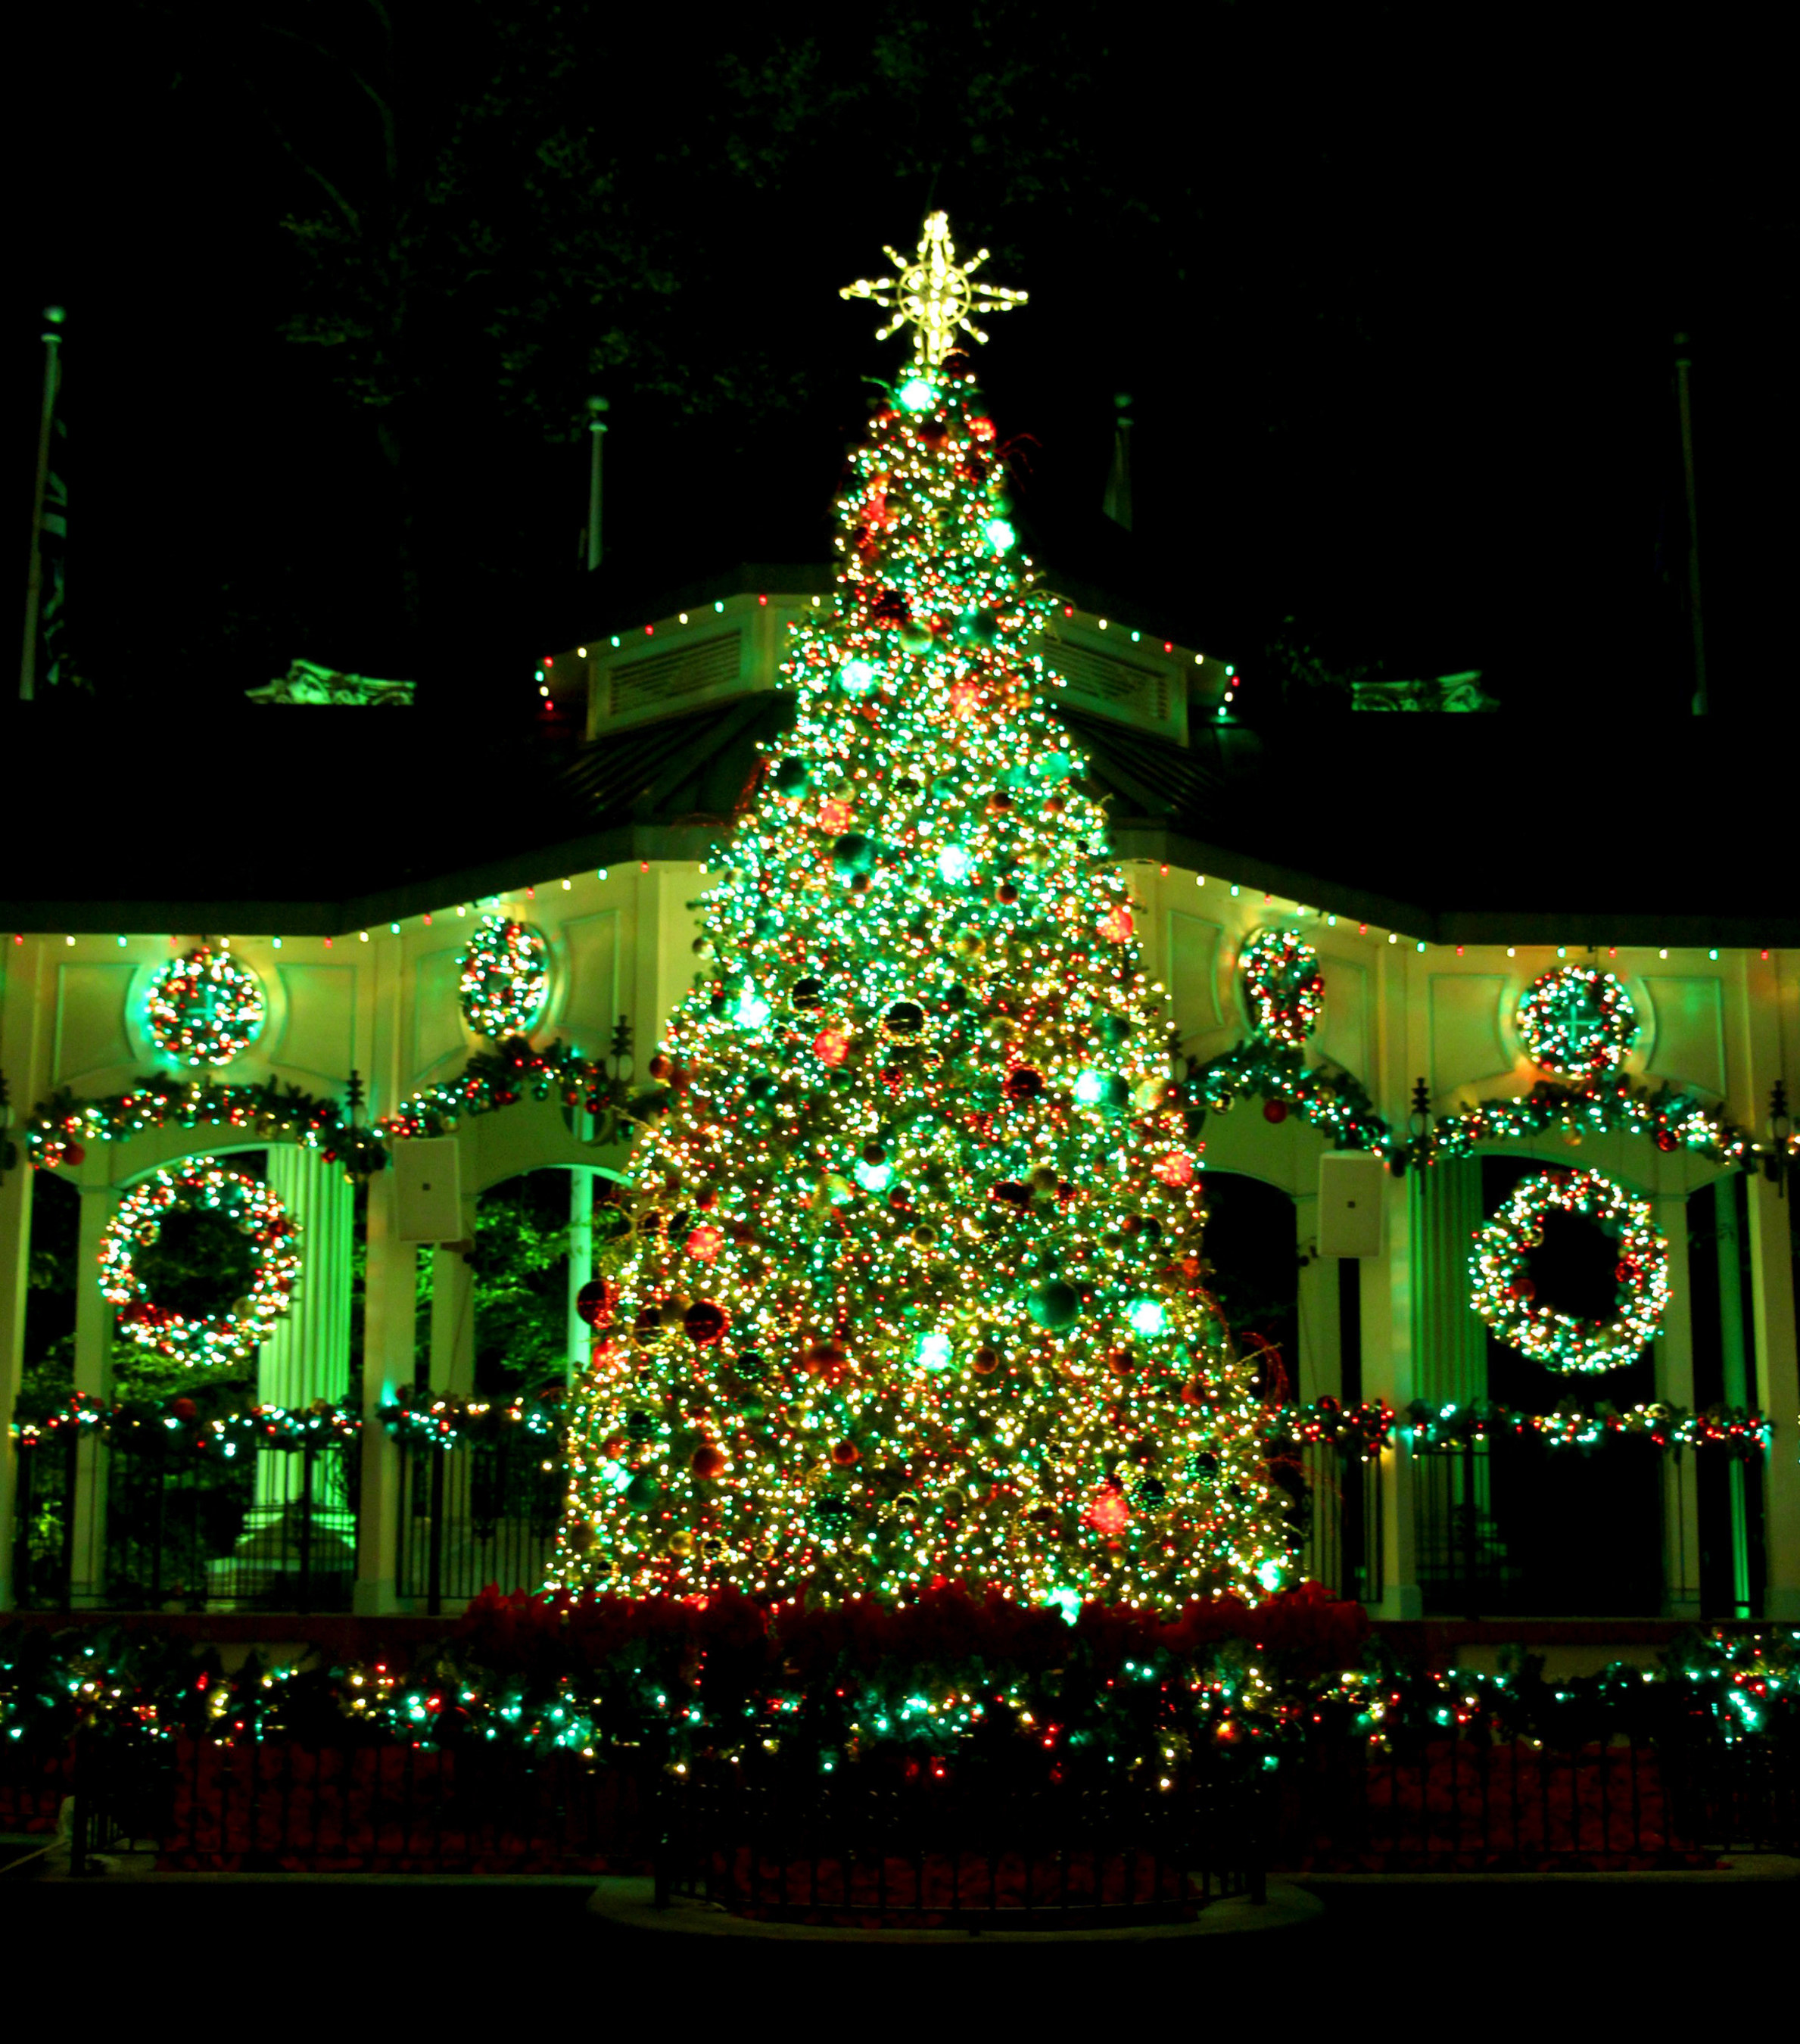 Each night, a huge Christmas tree will be lit near the entrance of Six Flags Over Georgia to mark the official evening events for the all-new Holiday in the Park celebration, beginning November 22 and running on select days through January 4, 2015. The Christmas tree will be lit by local Military families, police officers, emergency personnel and families from the Children's Healthcare of Atlanta. The lighting will take place at 6 p.m. before Christmas and at 5 p.m. after Christmas.